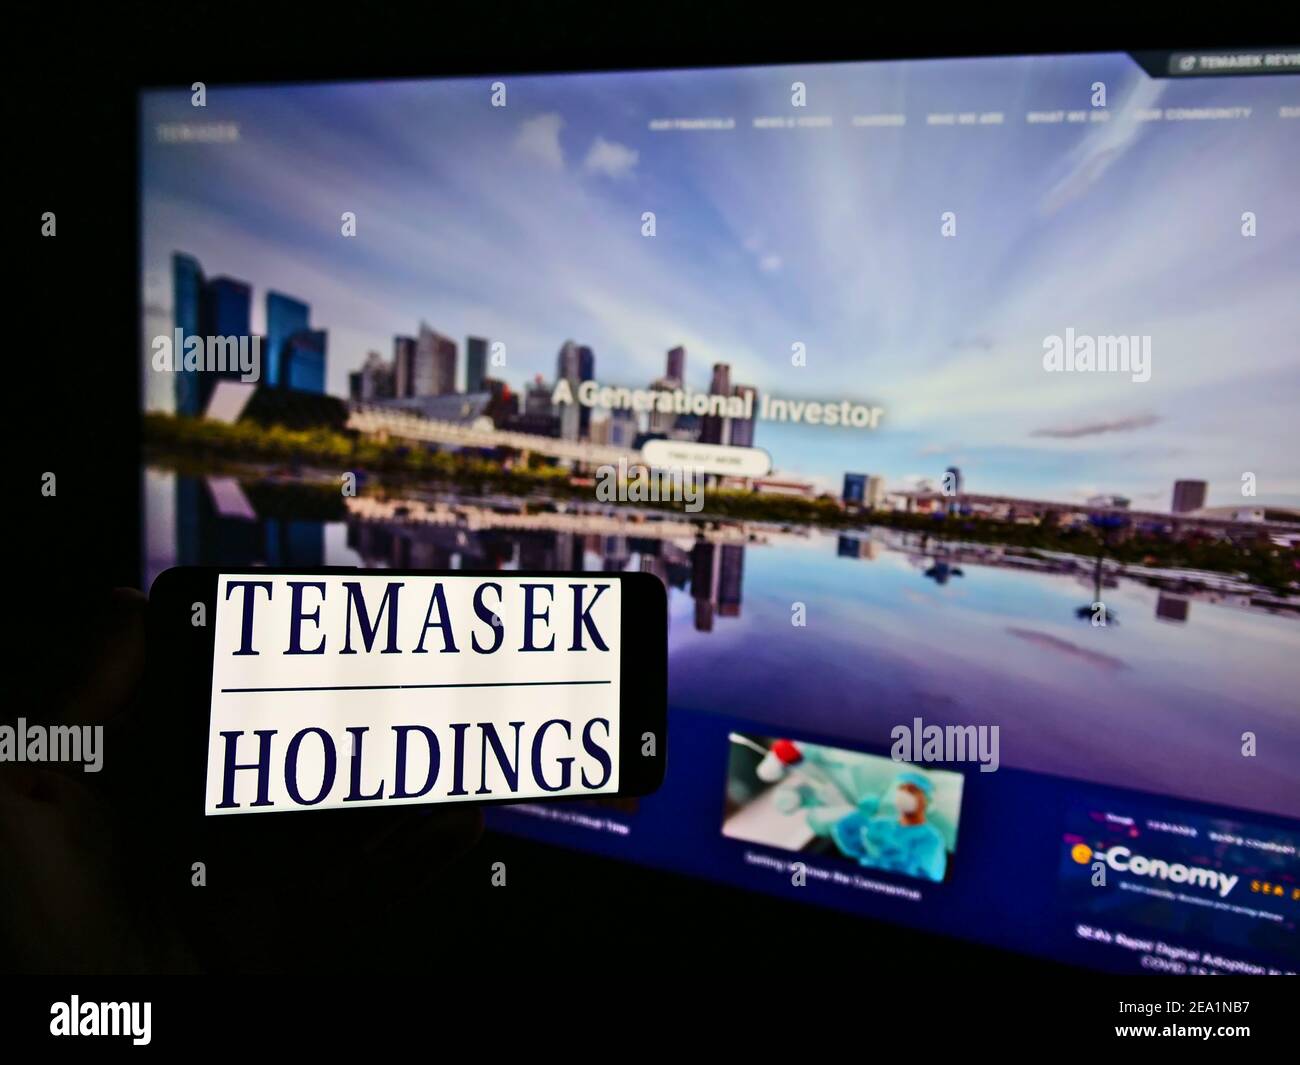 Person holding smartphone with logo of Singaporean investment company Temasek Holdings on screen in front of website. Focus on phone display. Stock Photo